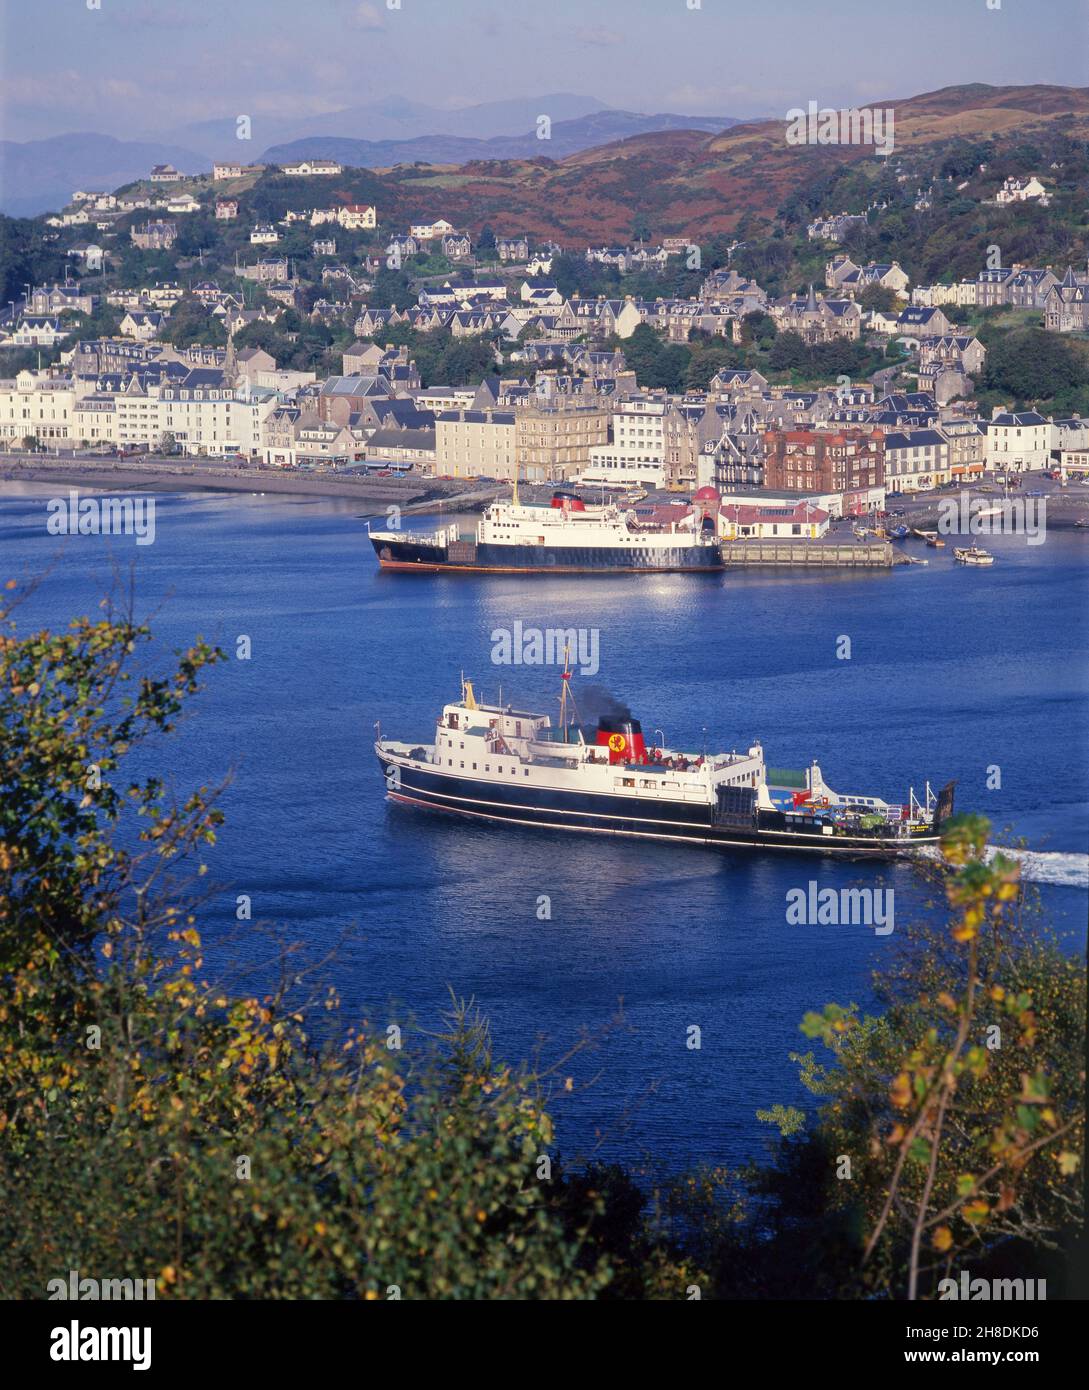 Summer view scene of Oban in the 1970s with the MV Glen Sannox and MV Columba in view, Argyll Stock Photo